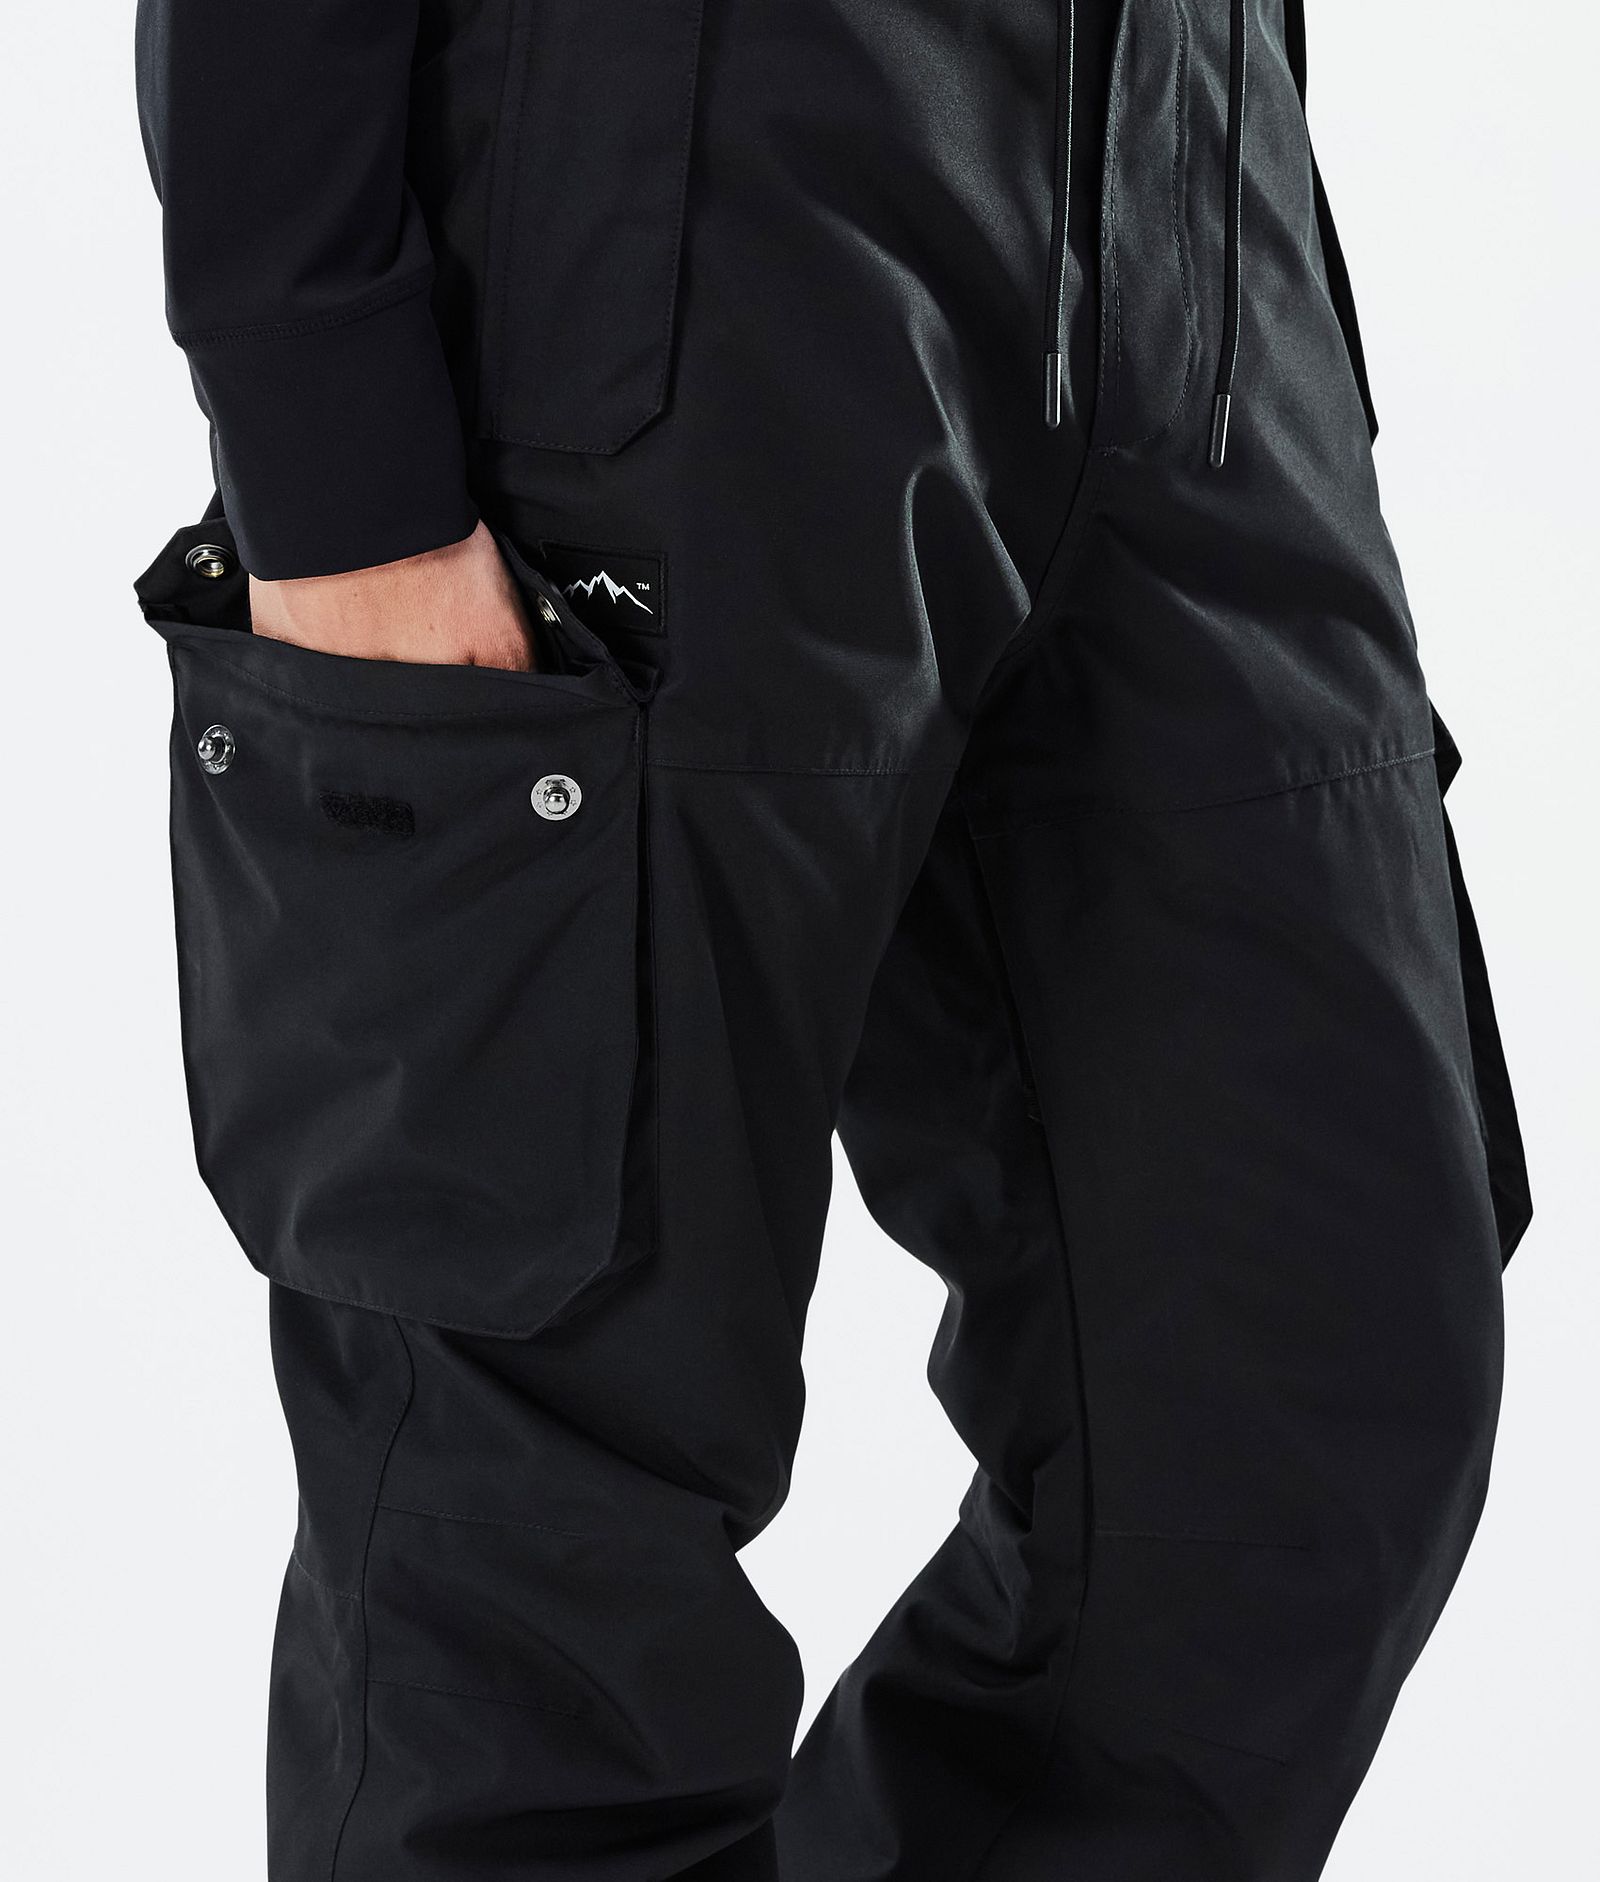 Dope Iconic W Snowboard Pants Women Blackout, Image 6 of 7